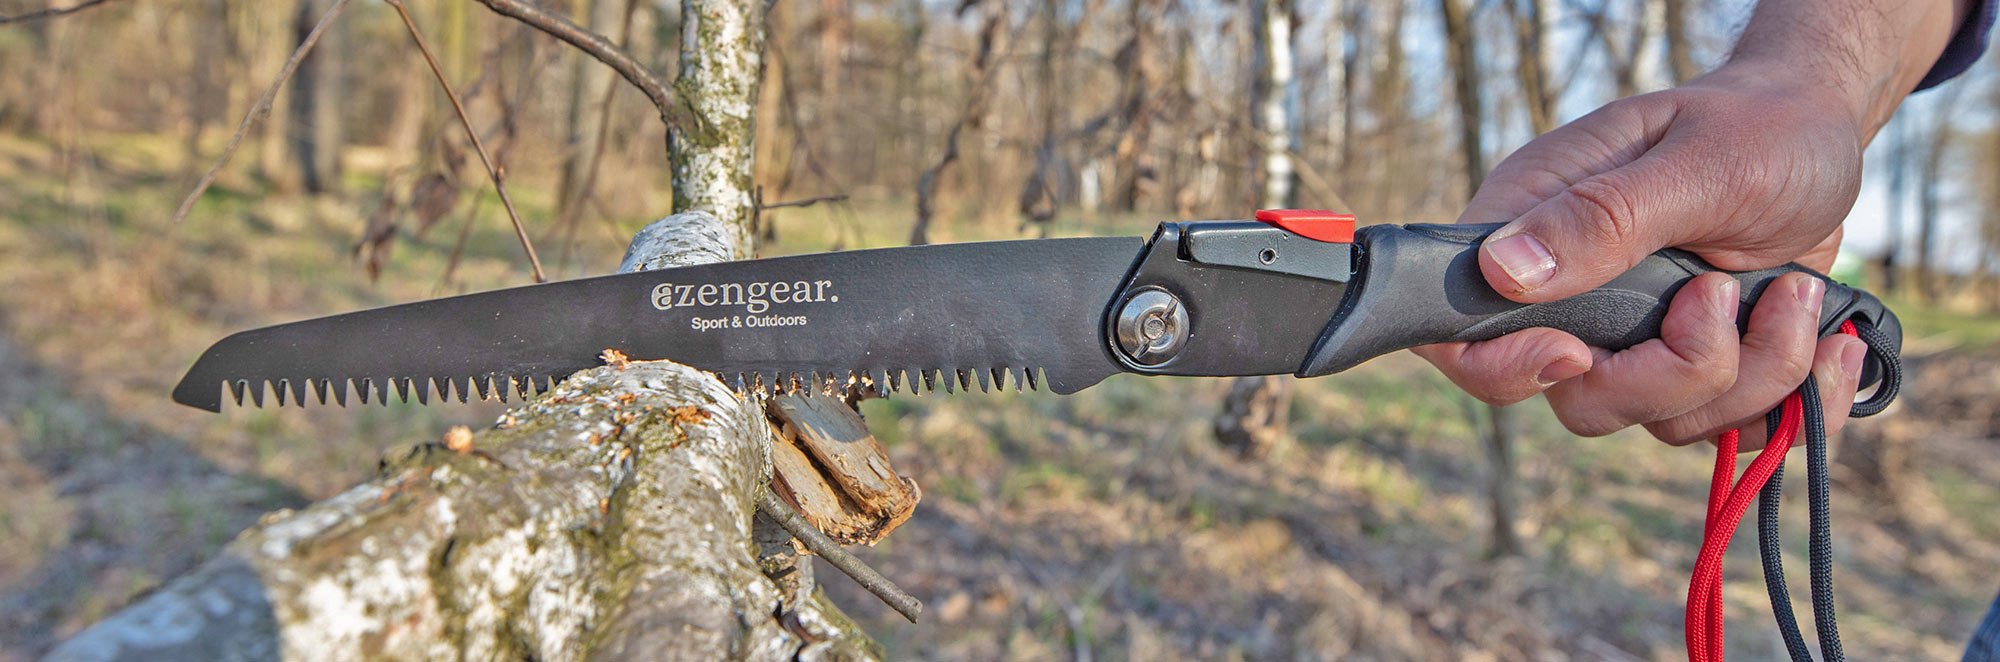 Tree Pruning Tips for Your Garden - aZengear